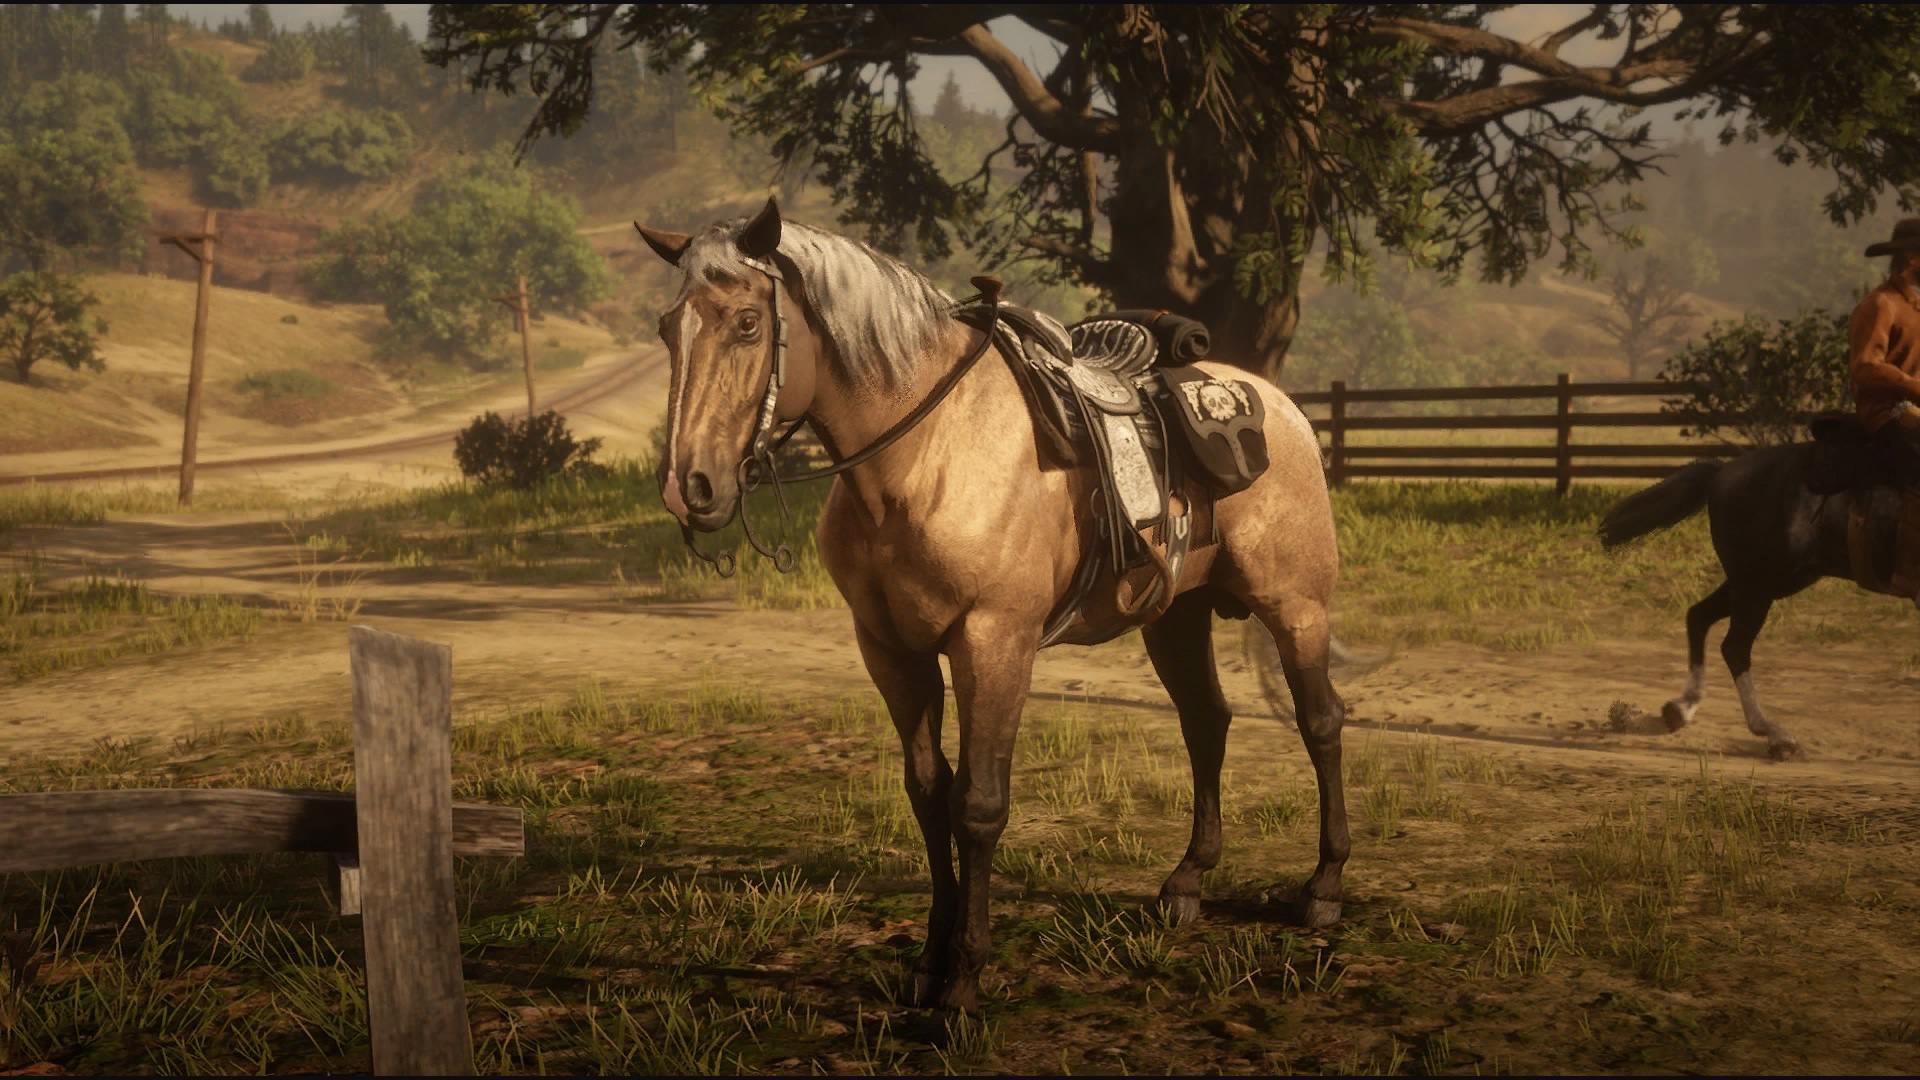 Wish we could get more horse breeds with the buckskin coat.: reddeadredemption